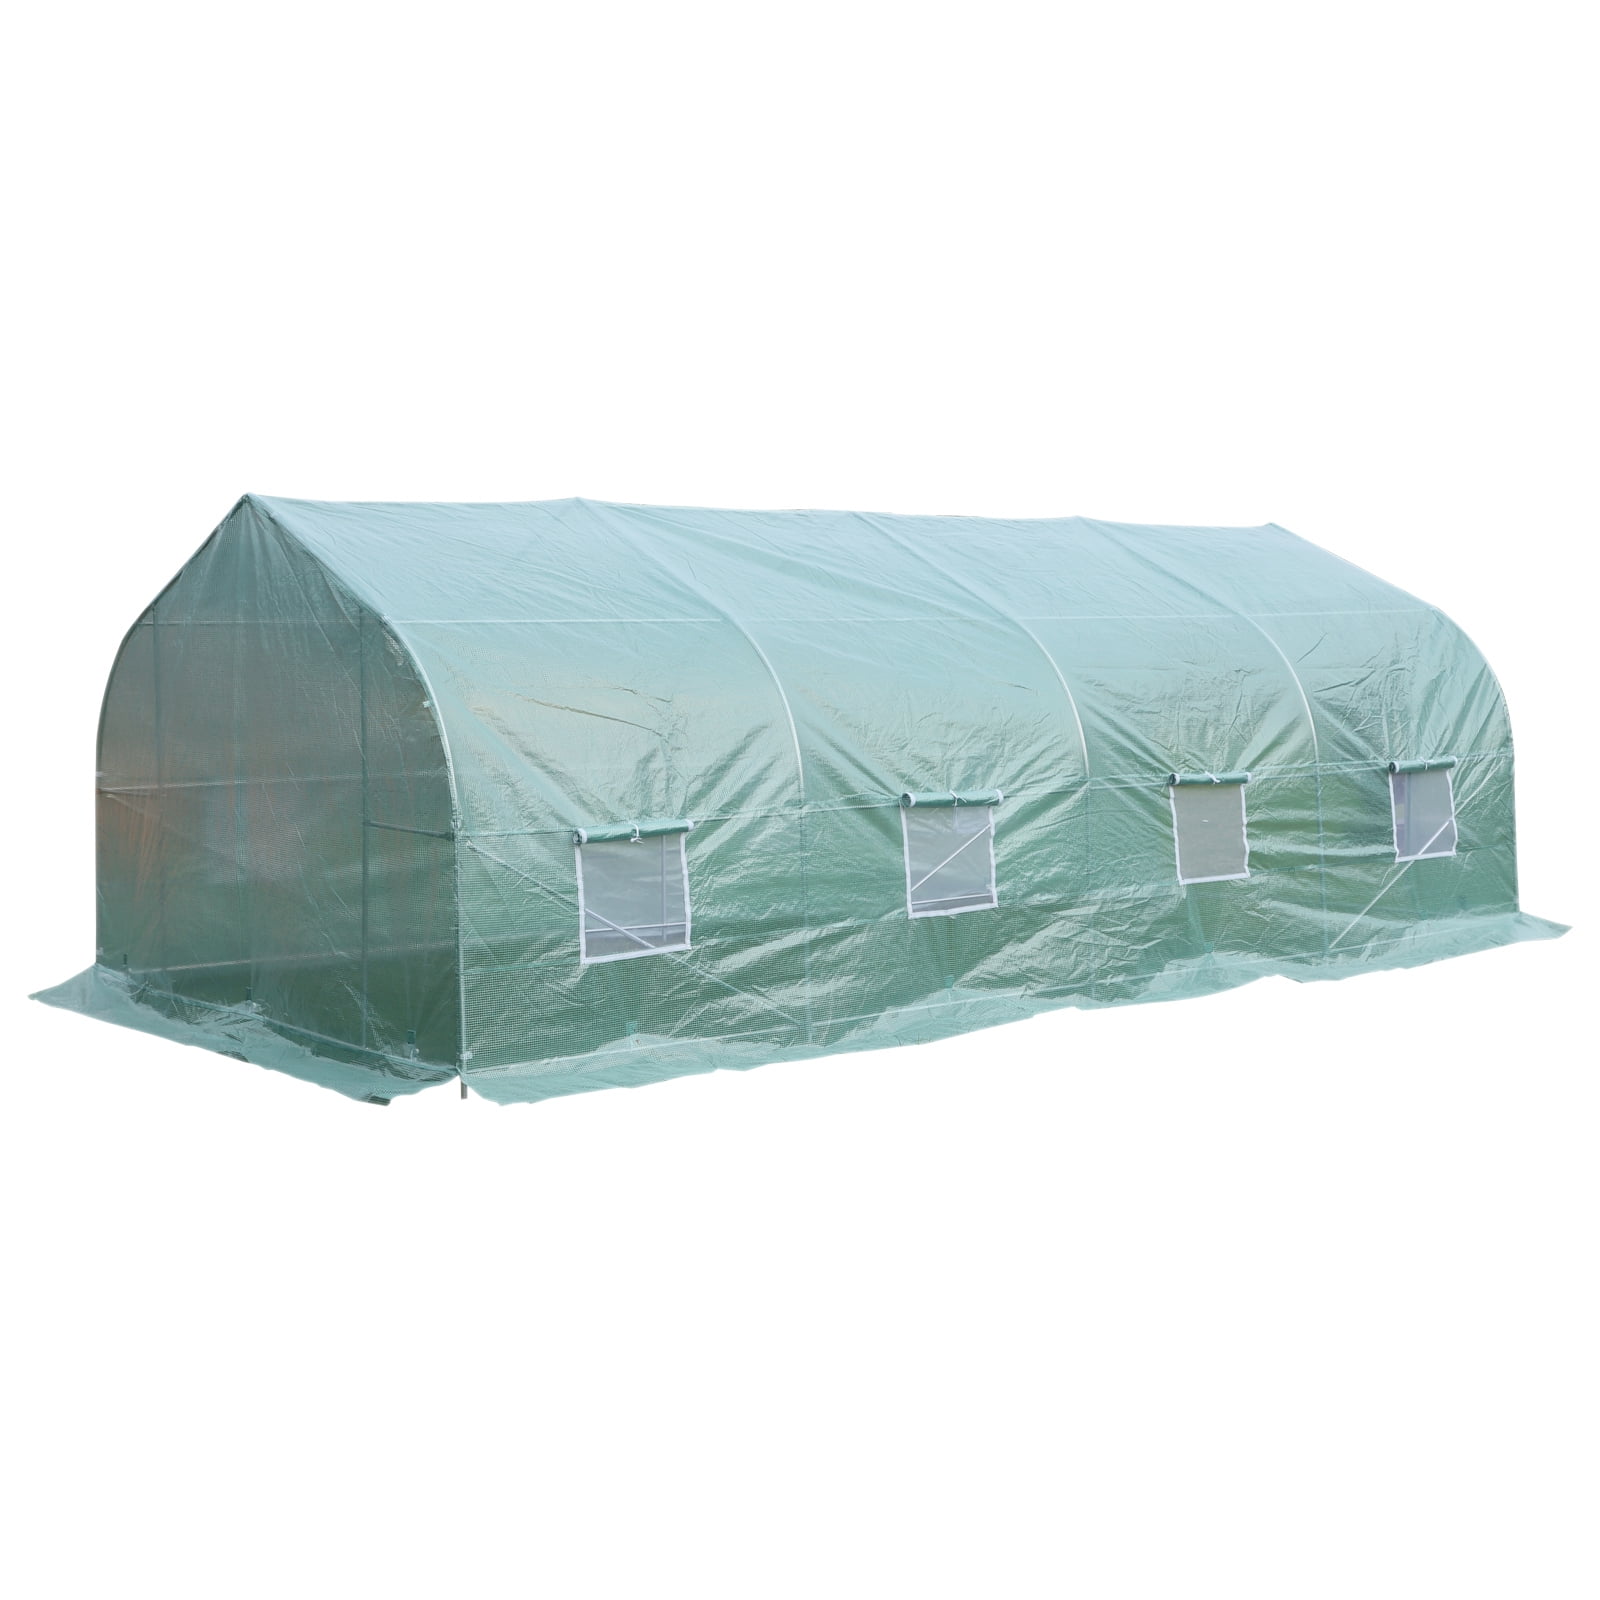 Outsunny High Tunnel Walk-In Garden Greenhouse - 20&amp;#39; x 10&amp;#39; x 7&amp;#39; - Deluxe